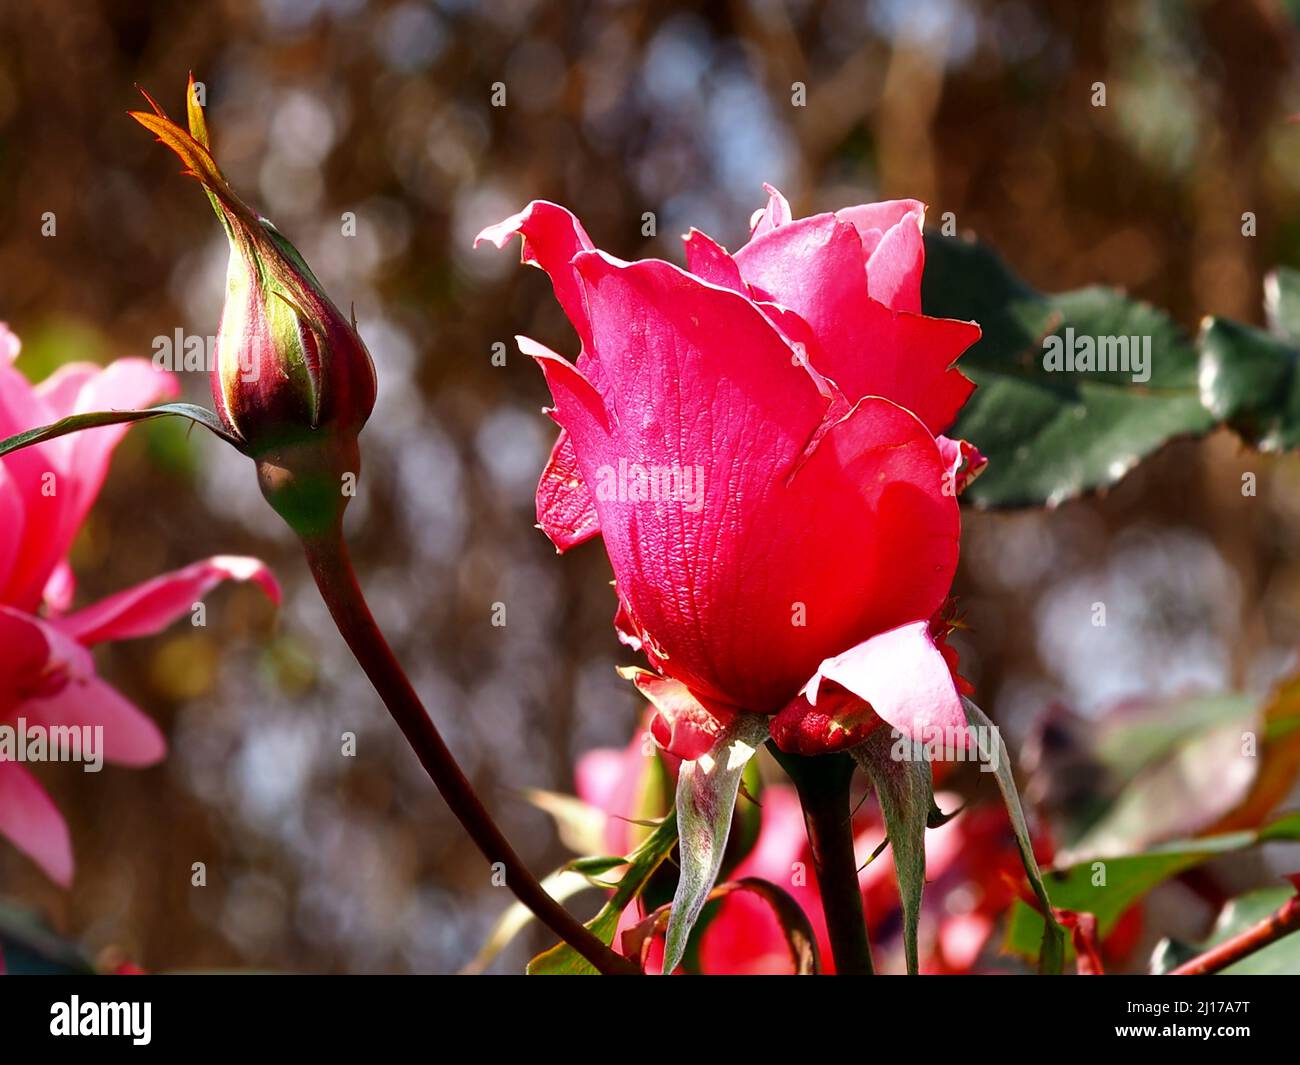 Beautiful pink rose and bud on a blurred background. Stock Photo